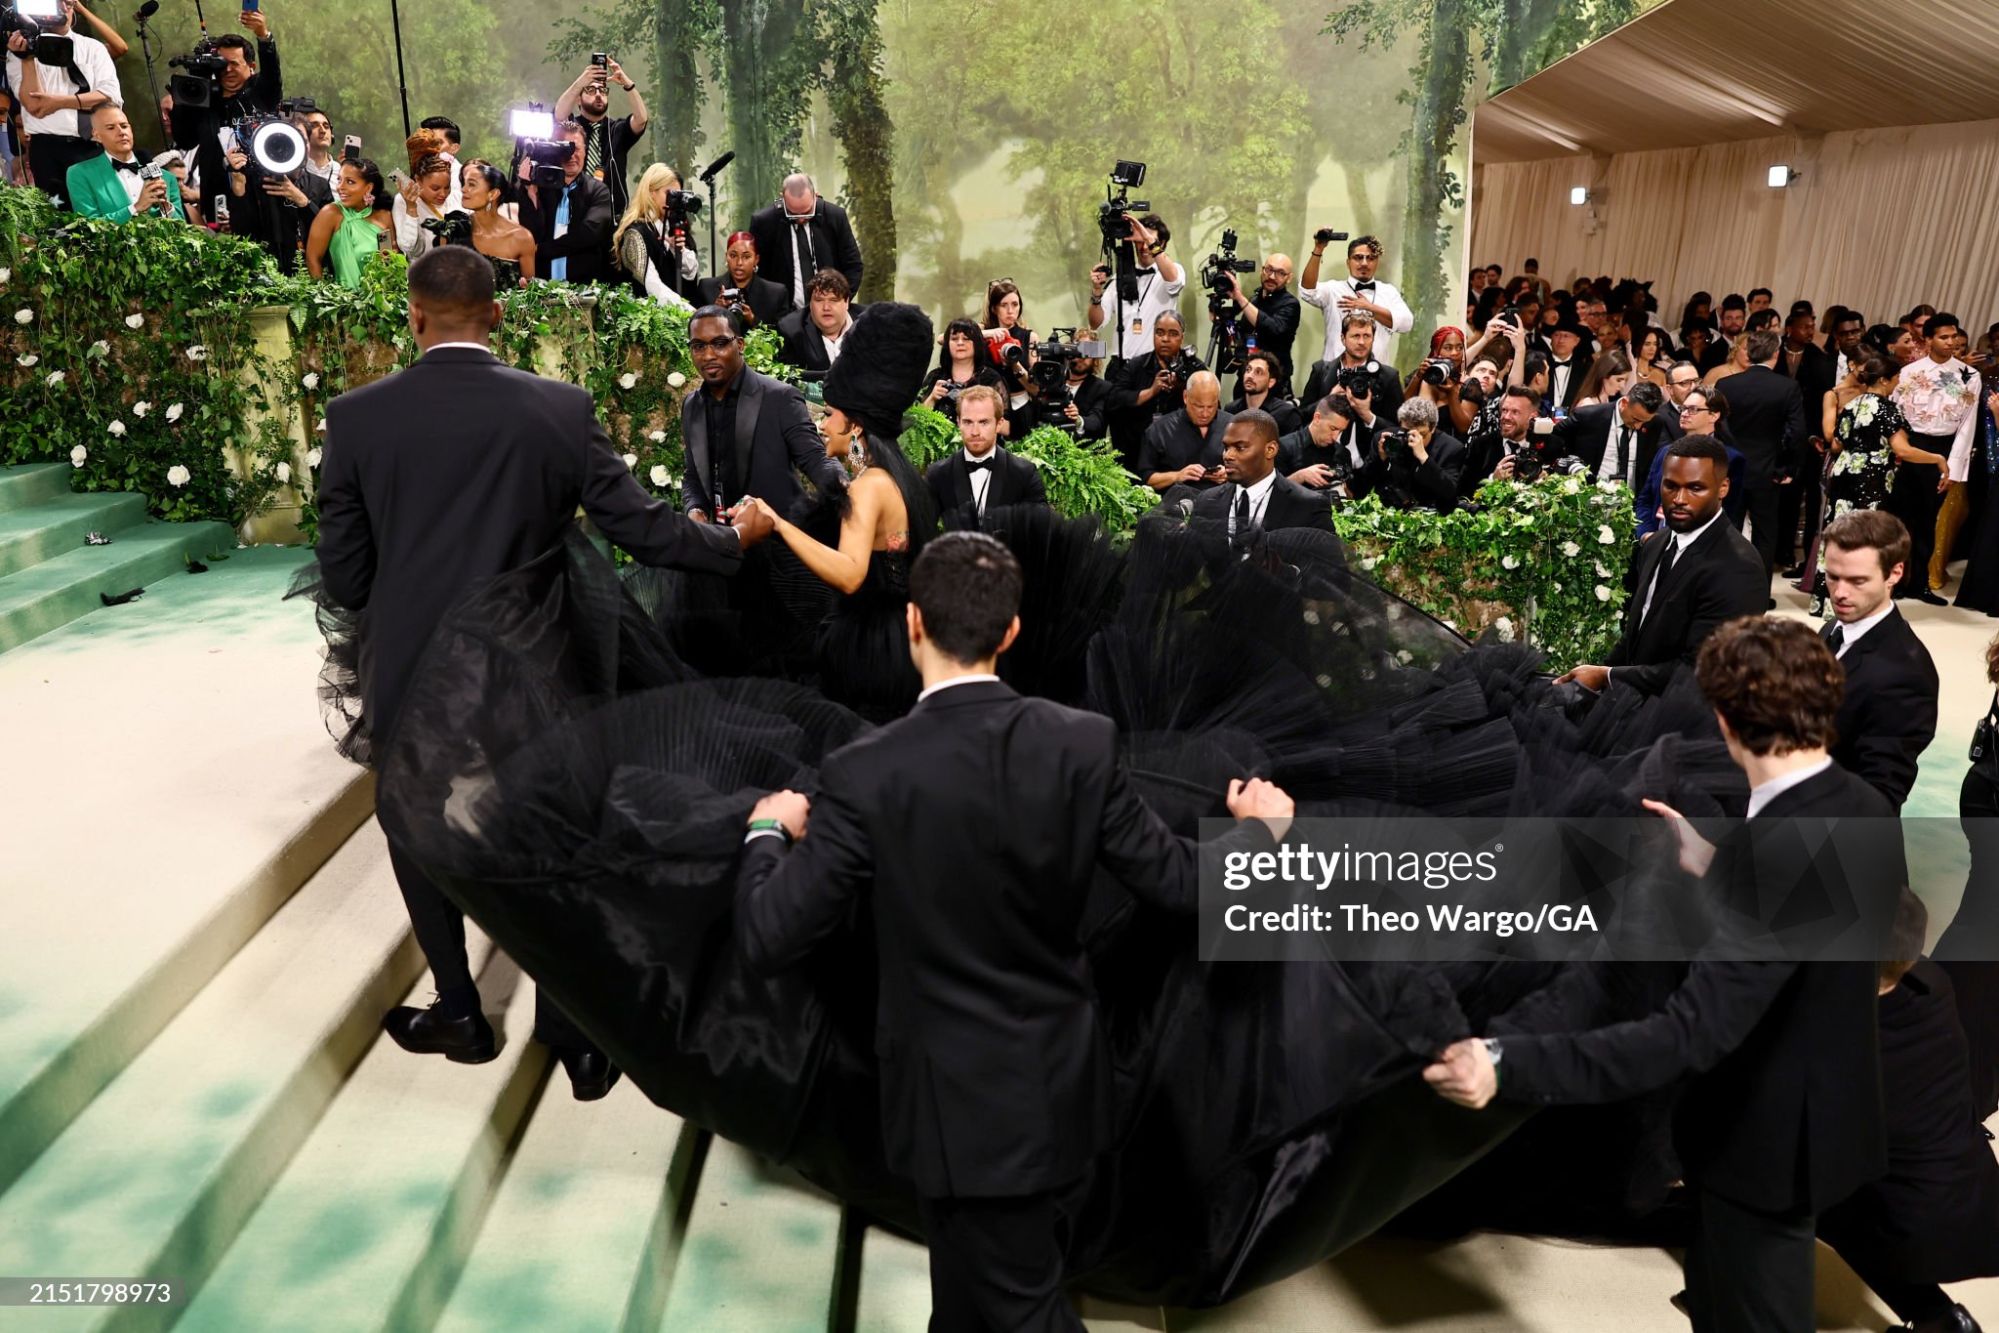 gettyimages-2151798973-2048x2048.jpg